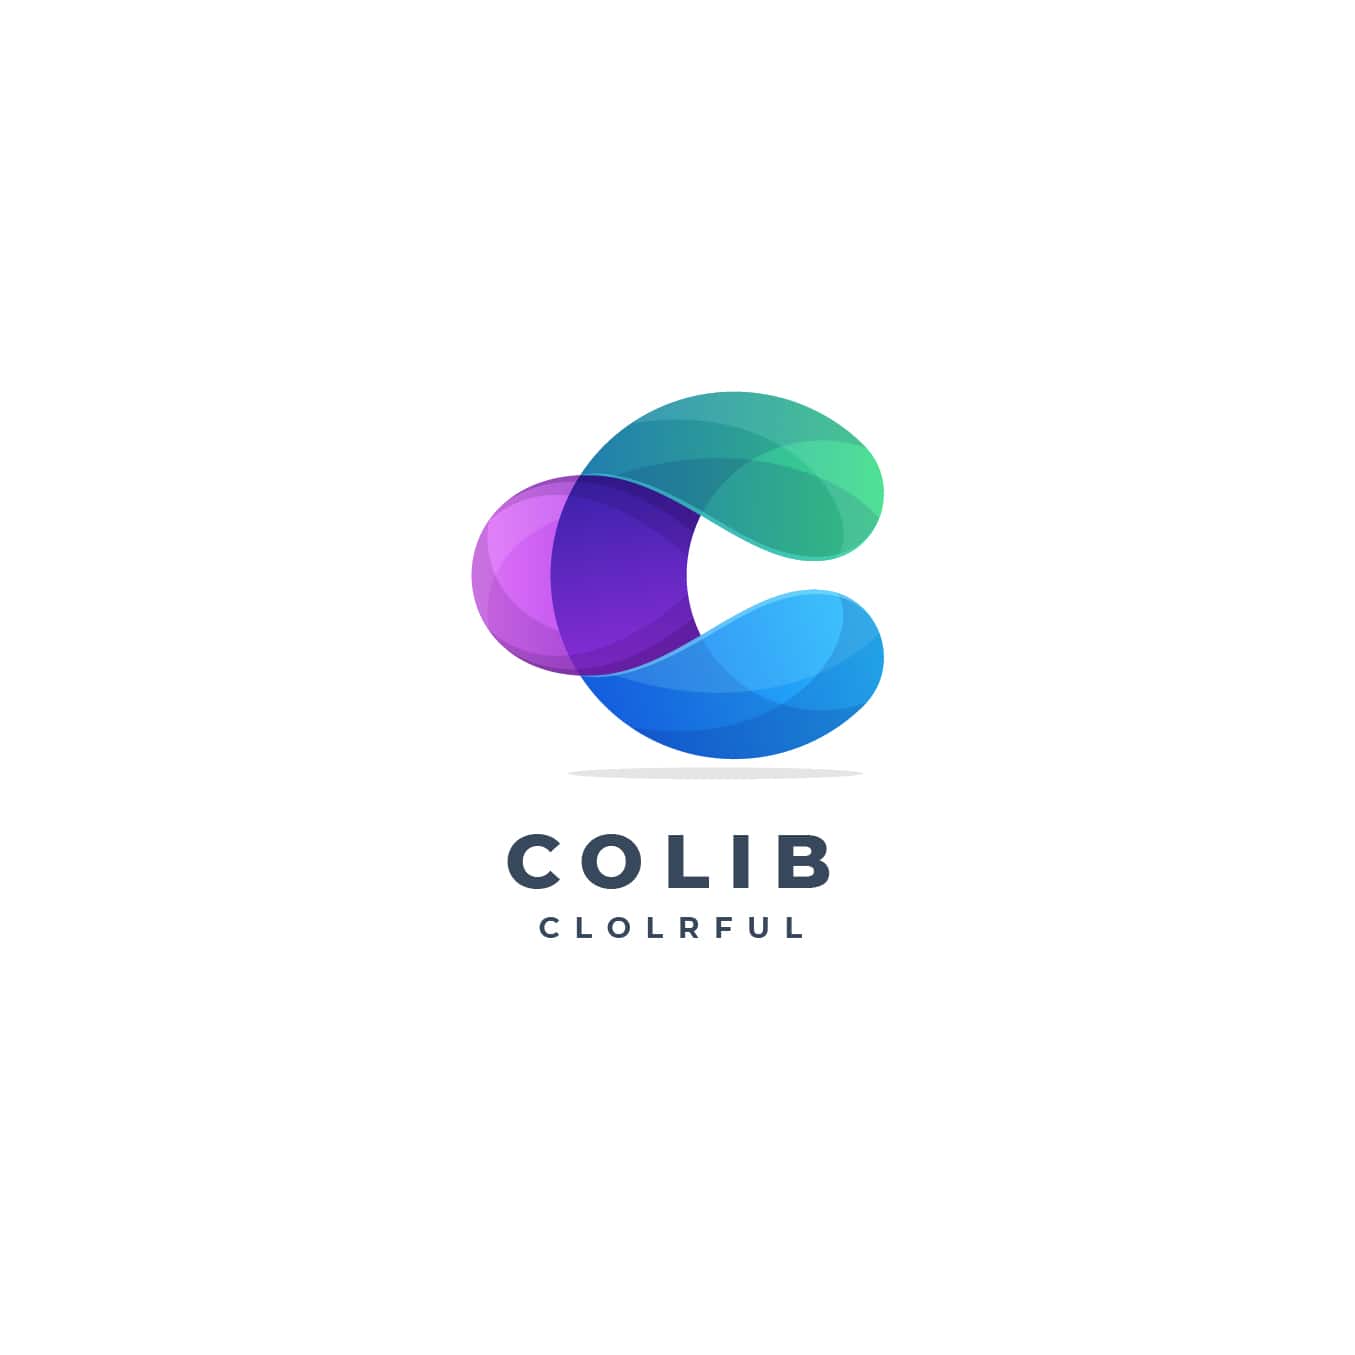 Colib is a practice management software